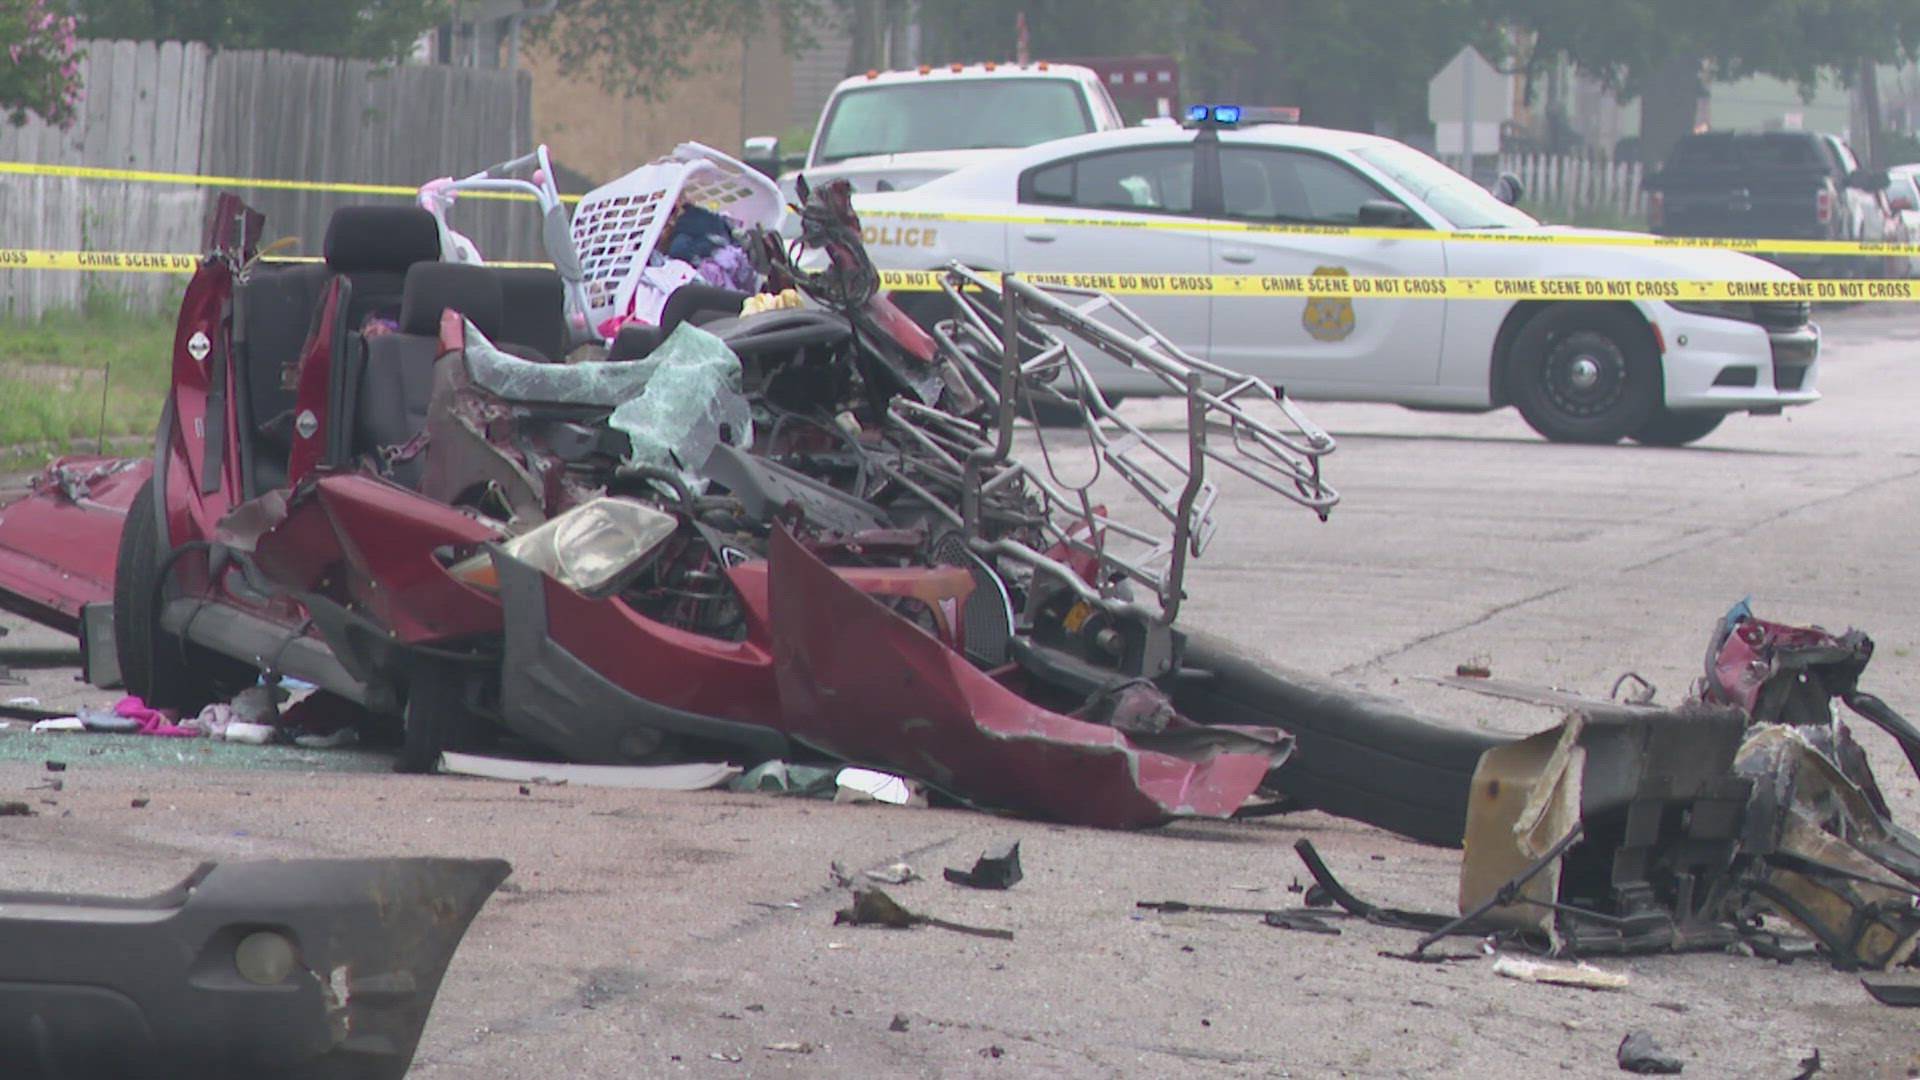 The crash was reported around 6 a.m. Friday near the intersection of West 18th Street and North Harding Street.